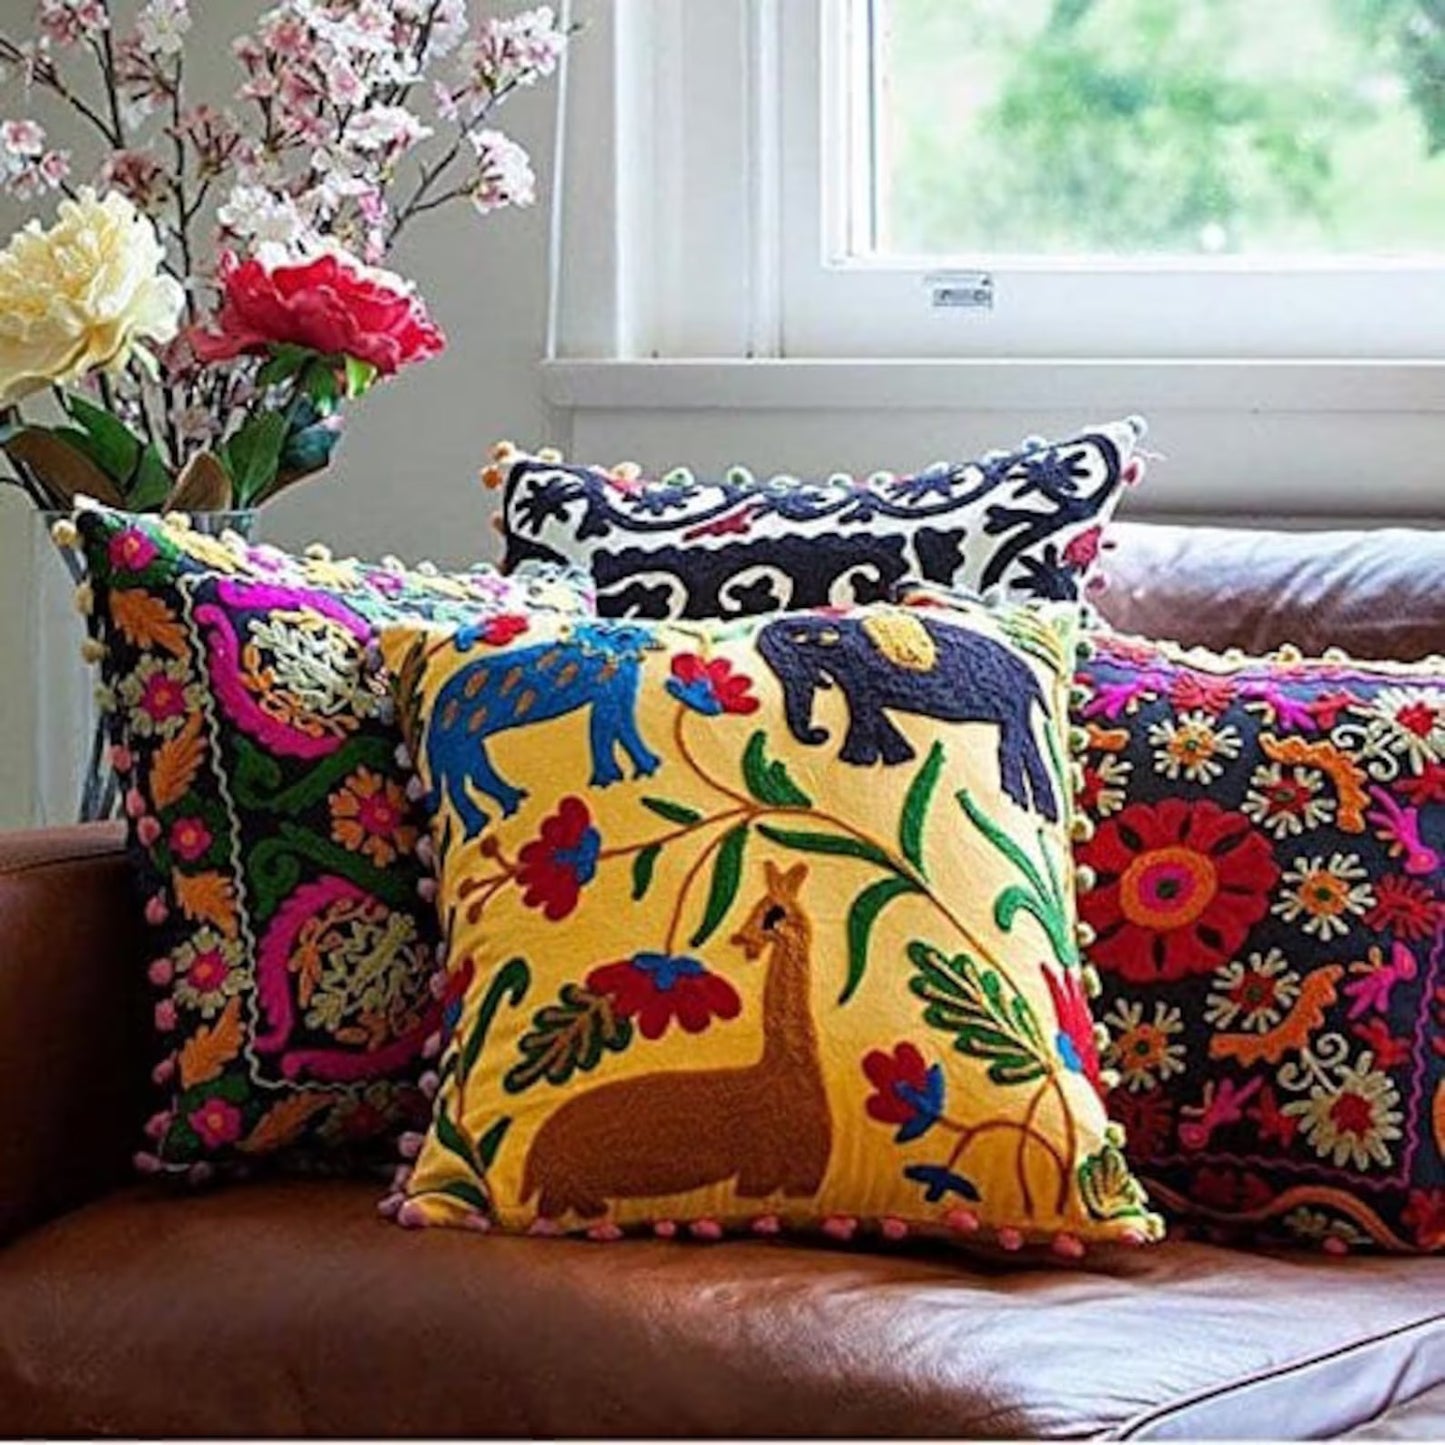 Embroidered Cushion Covers - Set of 2